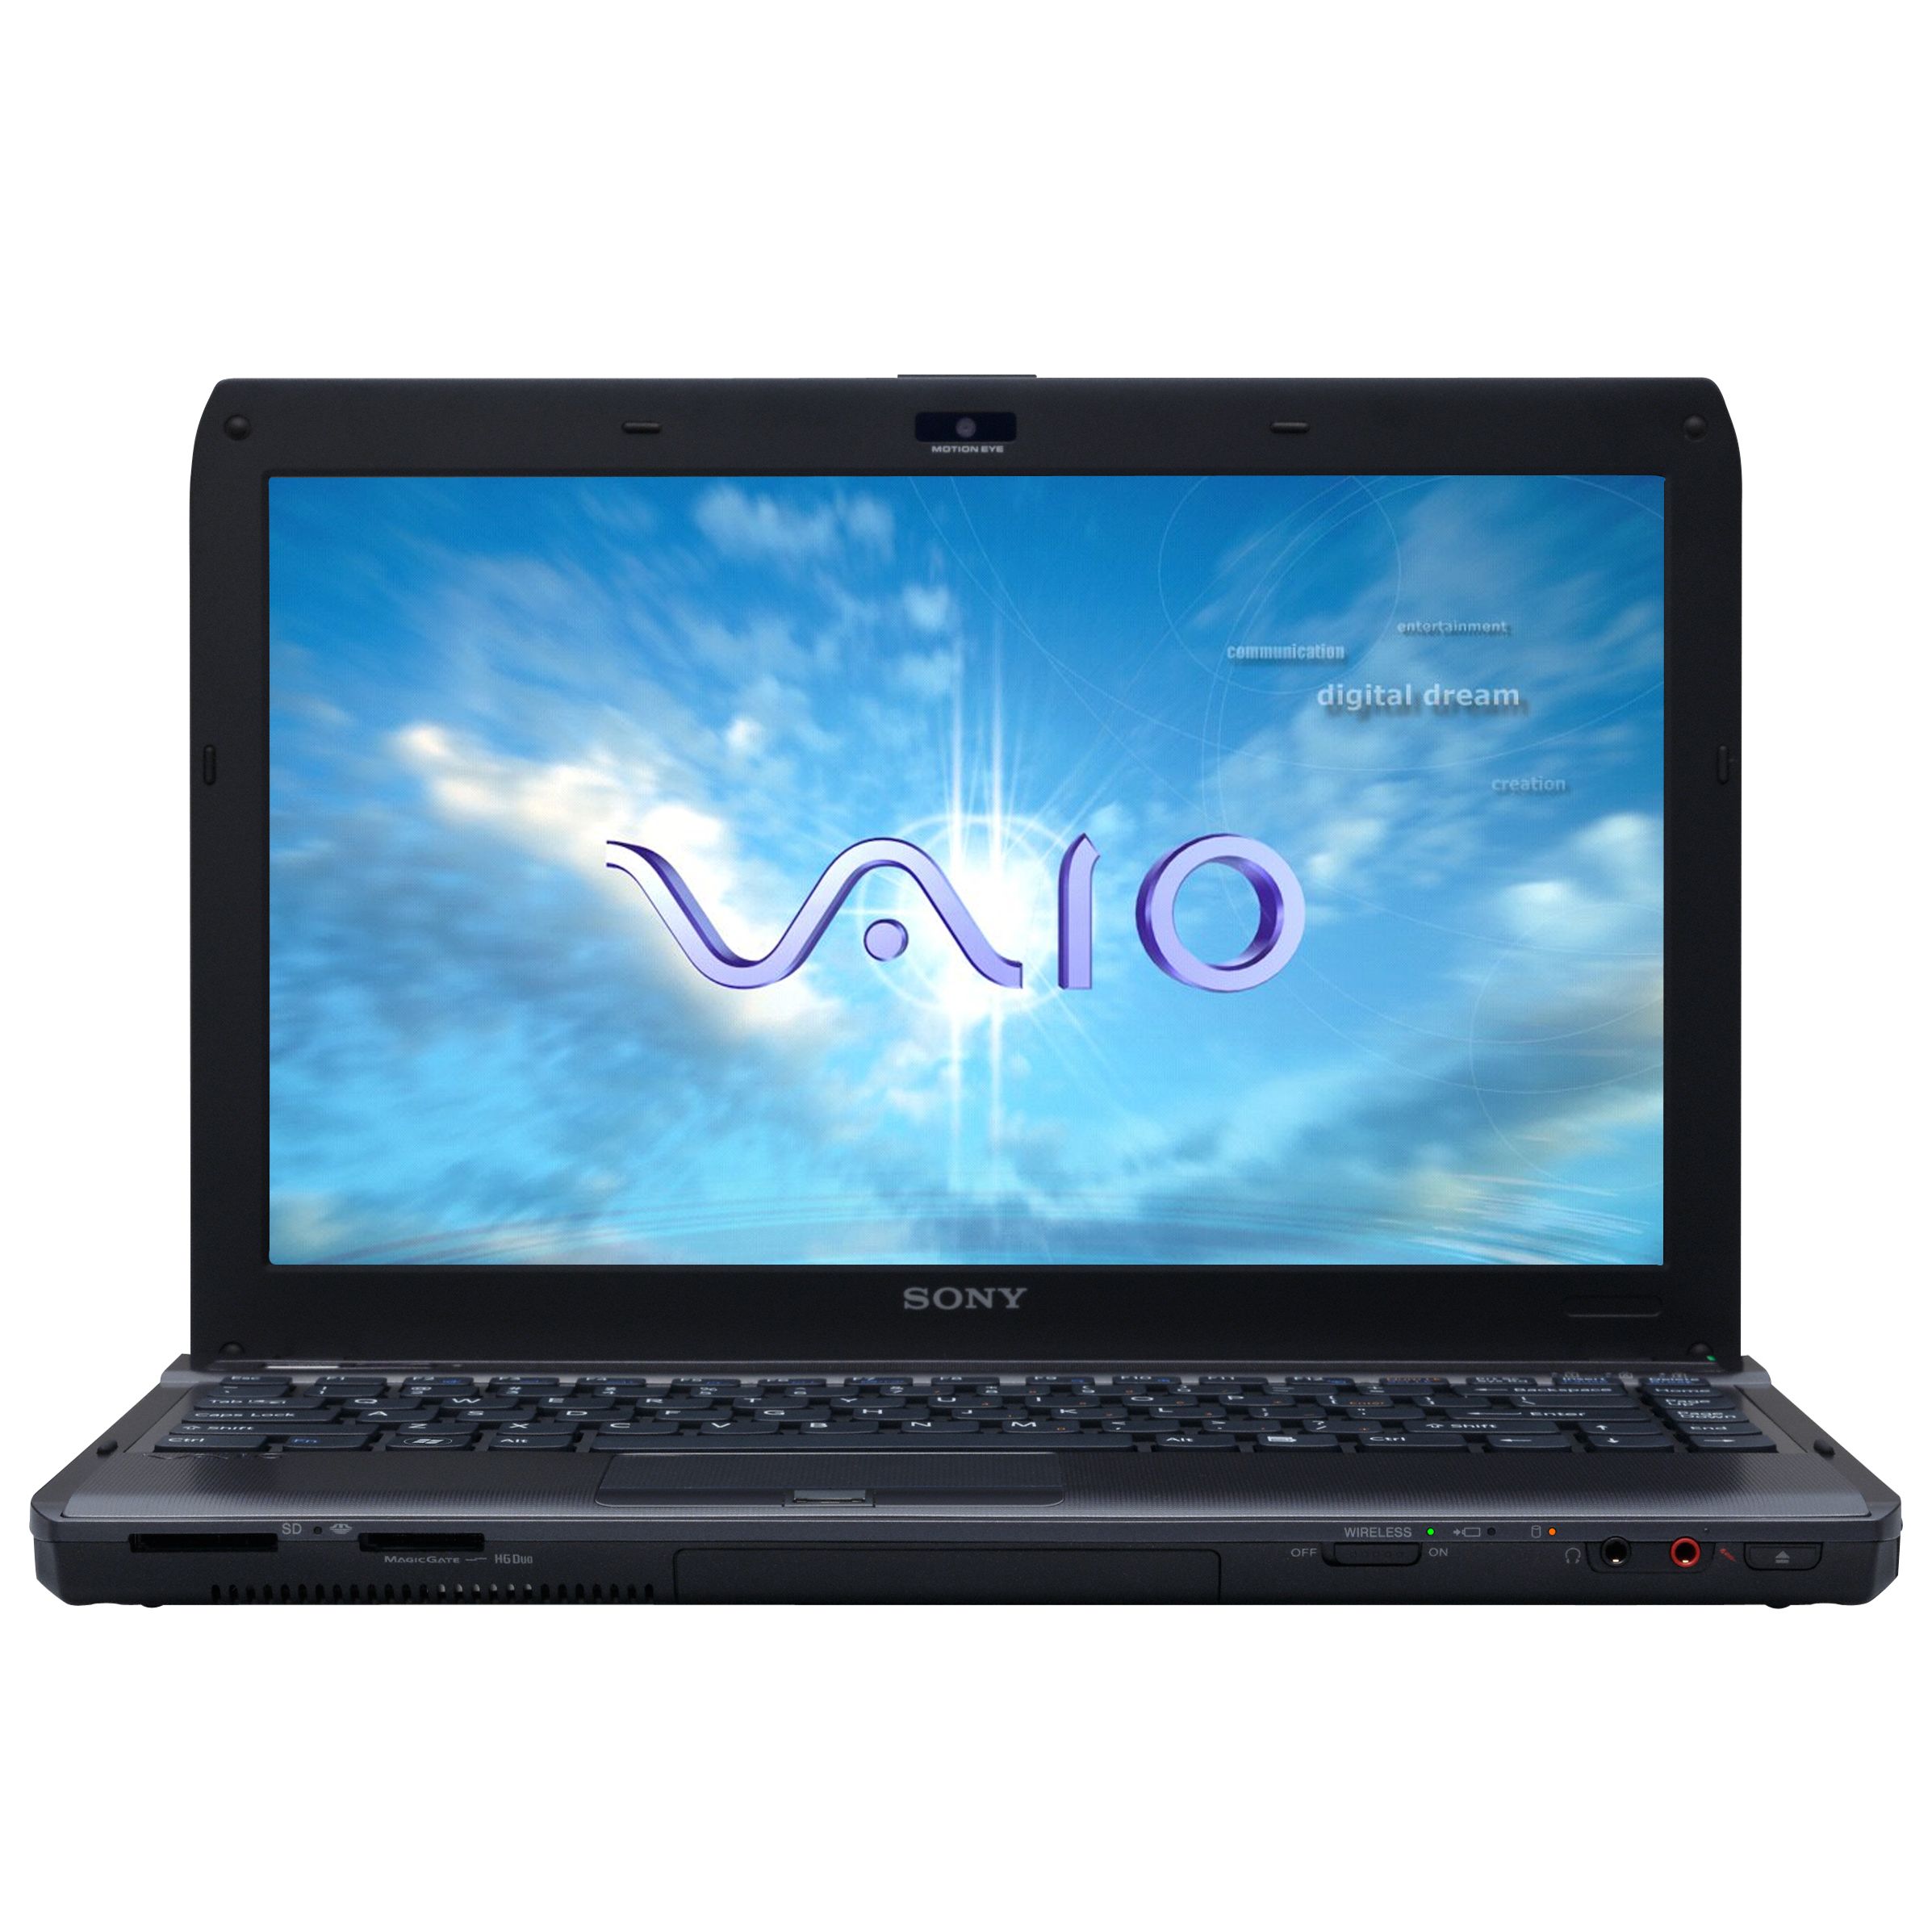 Sony Vaio VPC-S12V9E/B Laptop, Intel Core i5, 500GB, 2.4GHz, 6GB RAM with 13.3 Inch Display at John Lewis